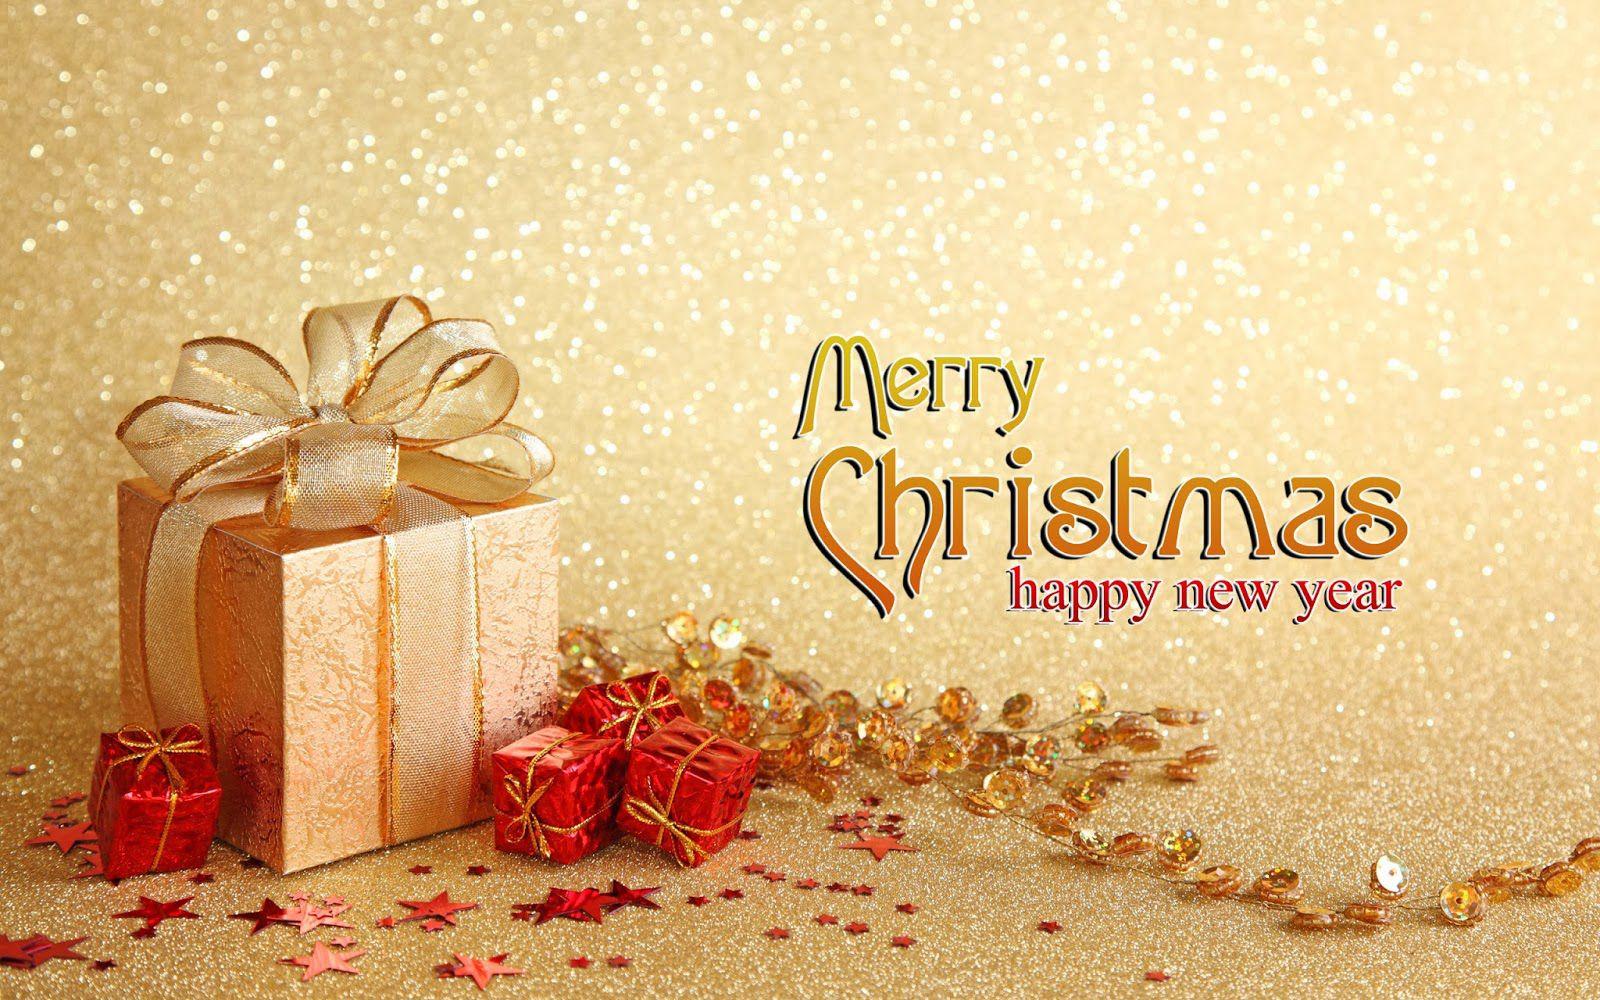 Merry Christmas Wishes, Greetings & Messages, SMS 2020